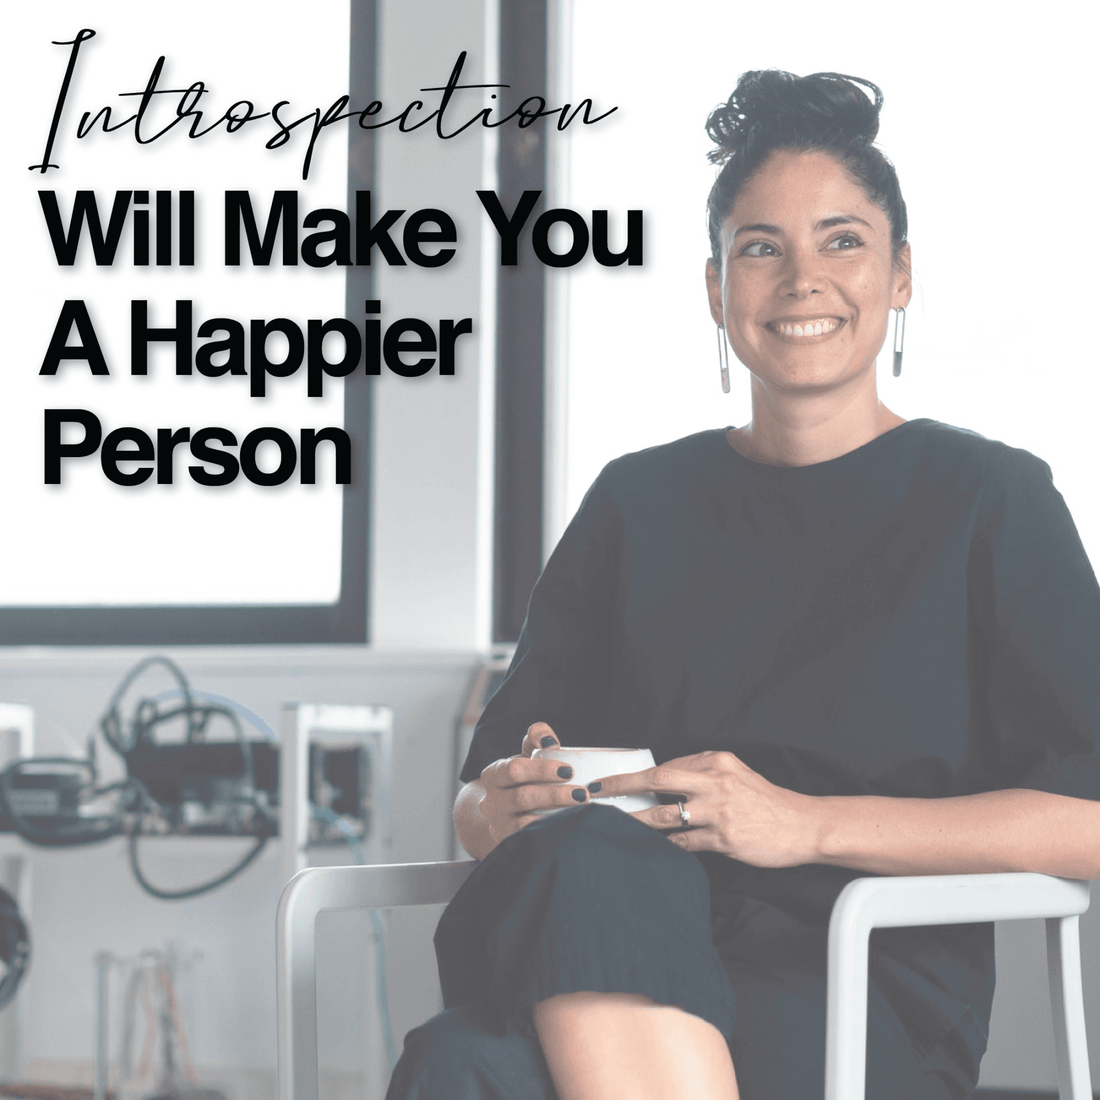 Why Introspection Will Make You A Happier Person - The House of Routine